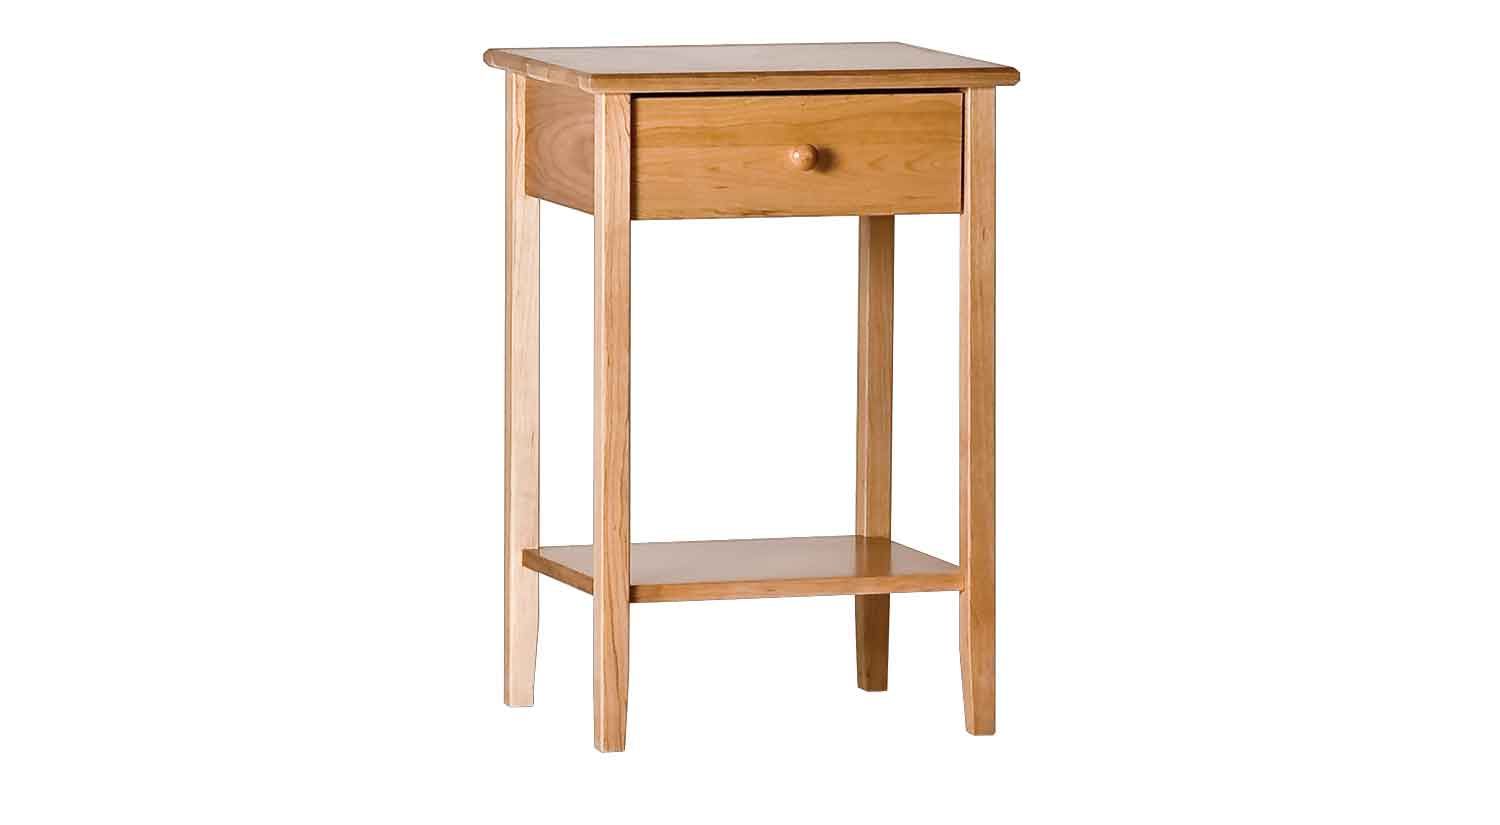 painting tall accent table stylish item for utilizing the long thin empty space wireless desk lamp half moon ikea glass shades with removable tray pink drum stool cover west elm